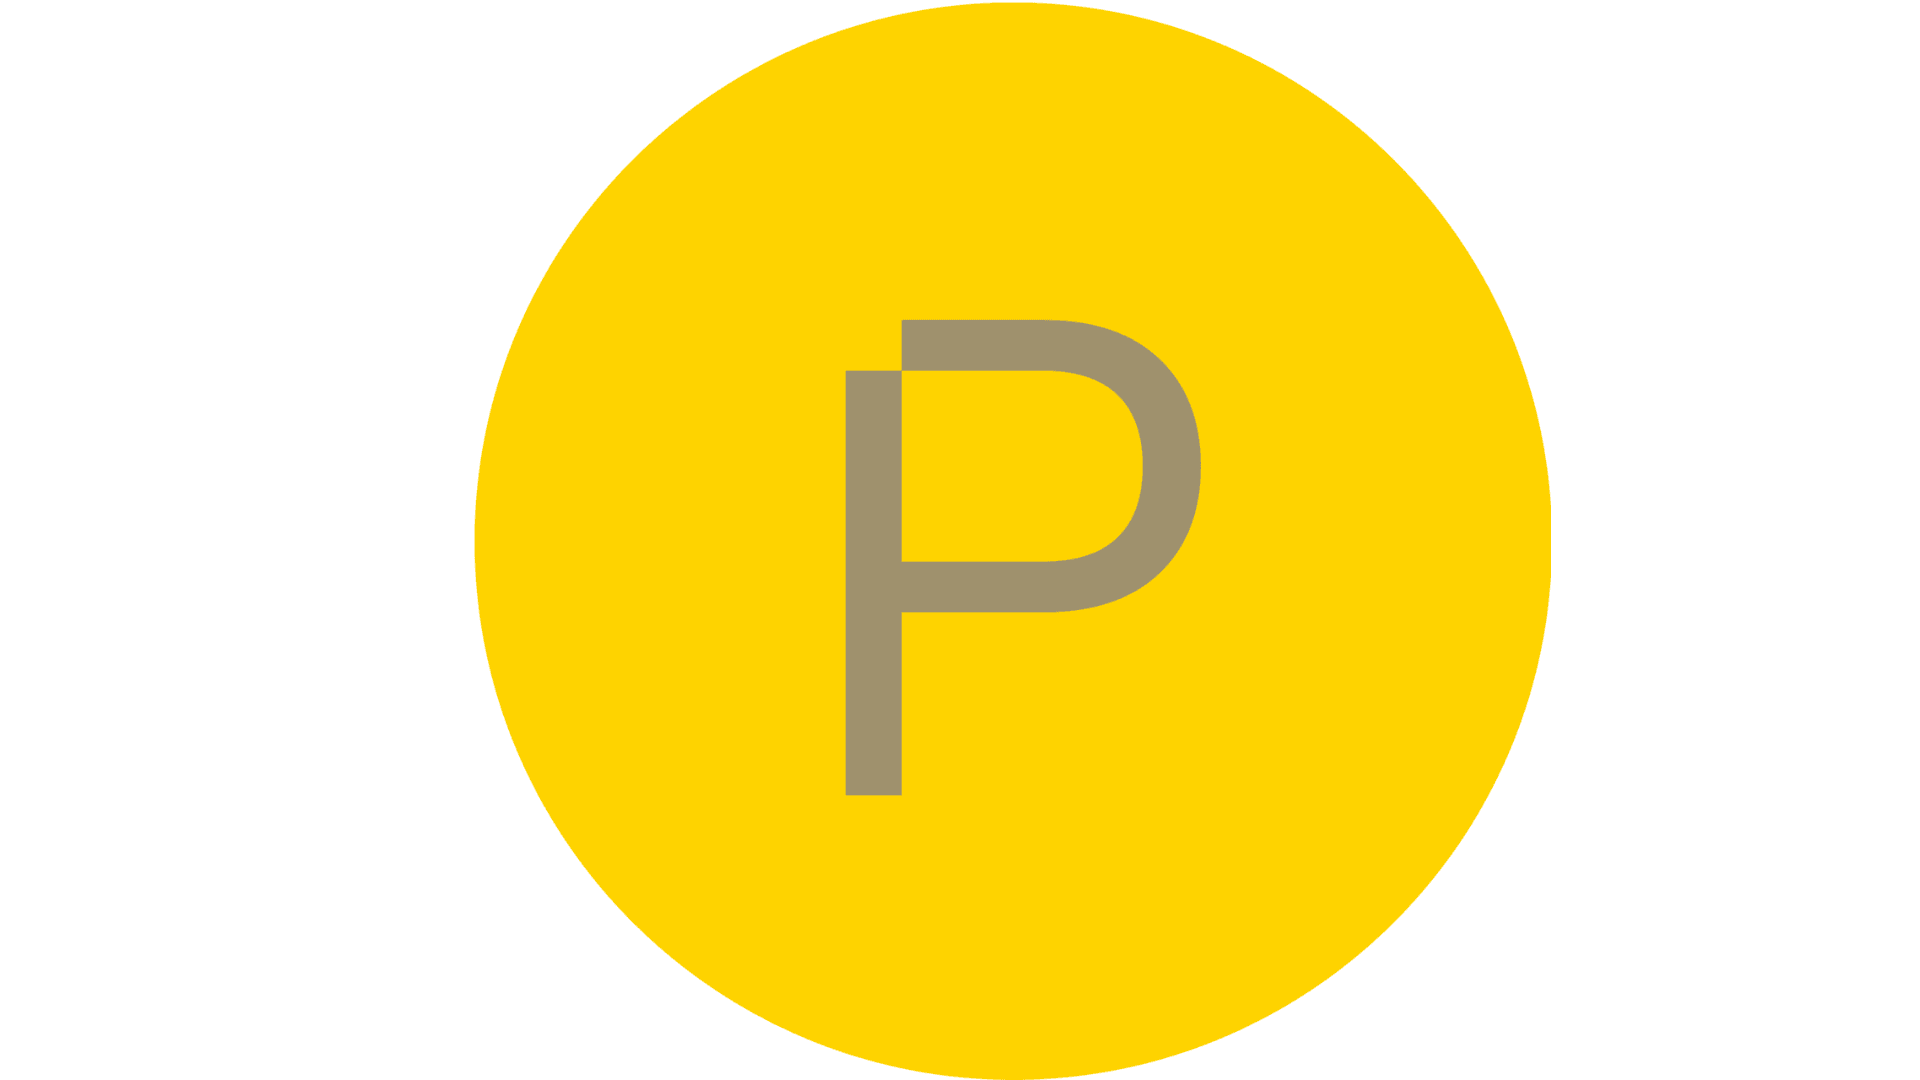 The logo of Postane in Istanbul is a yellow circle on a white background with a grey letter P